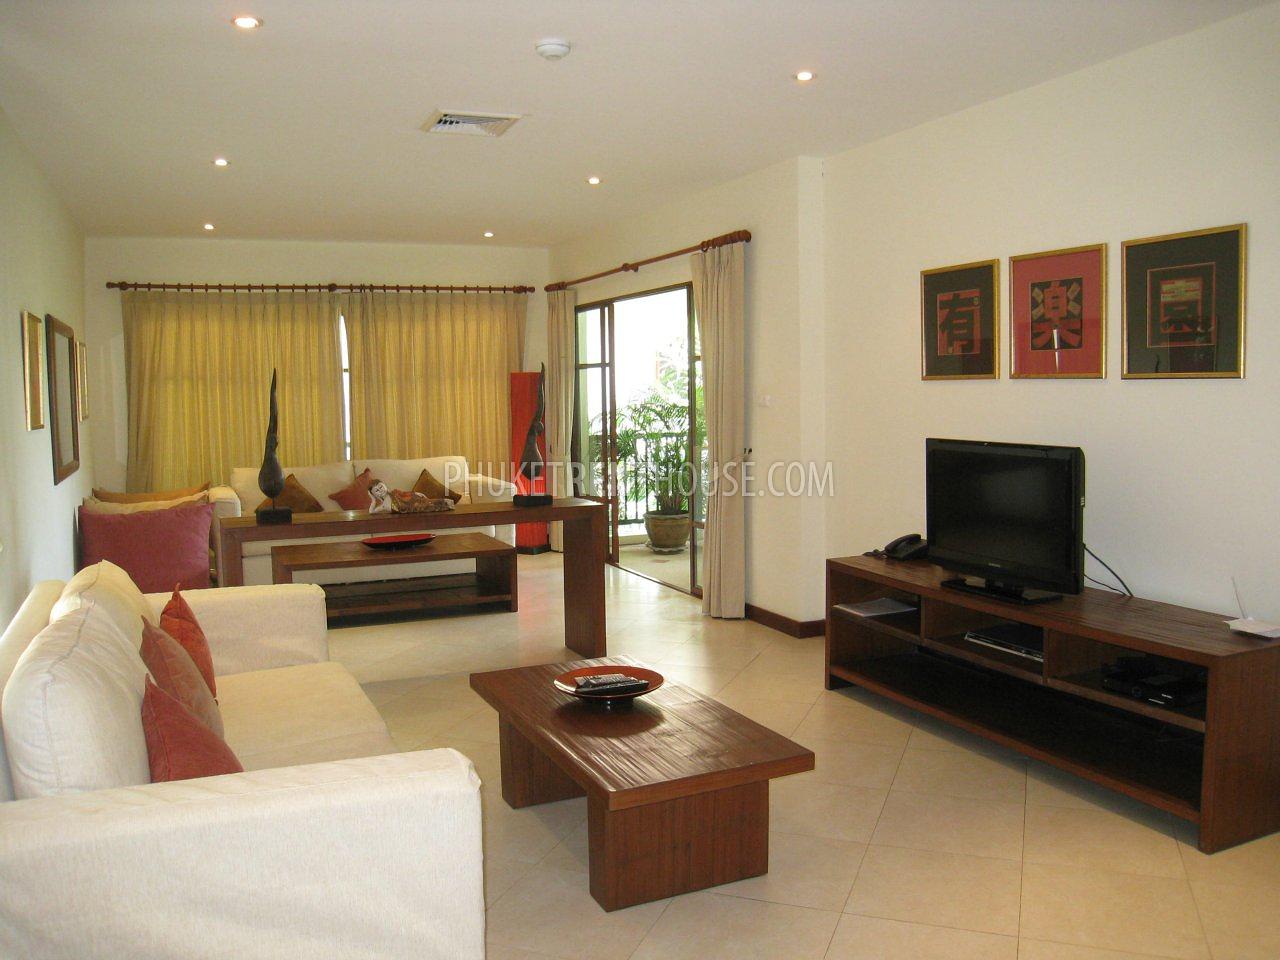 BAN19117: Stunning 2 Bedroom Apartment with Amazing Facilities. Photo #2